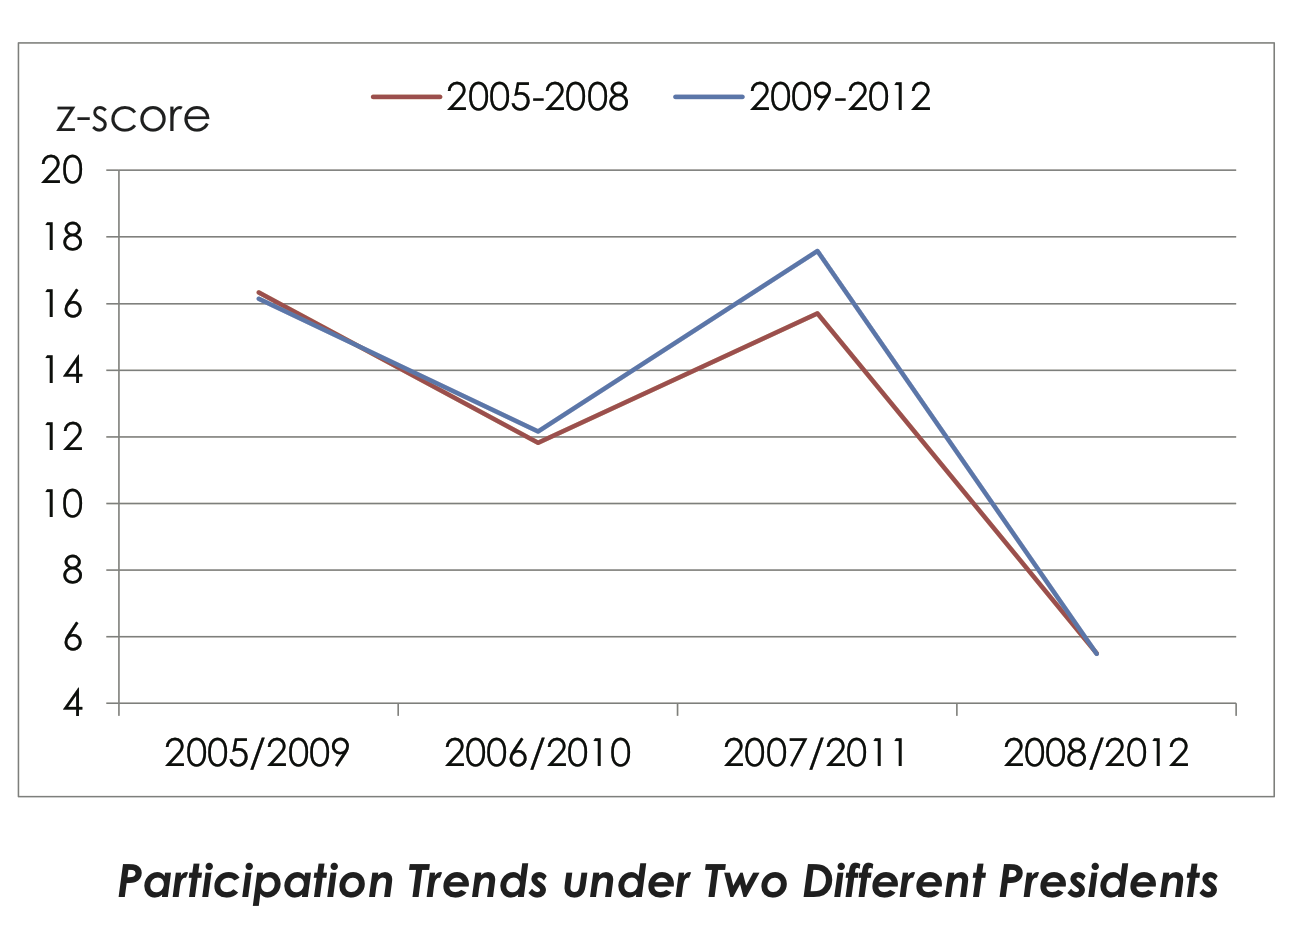 Participation trends under two different presidents